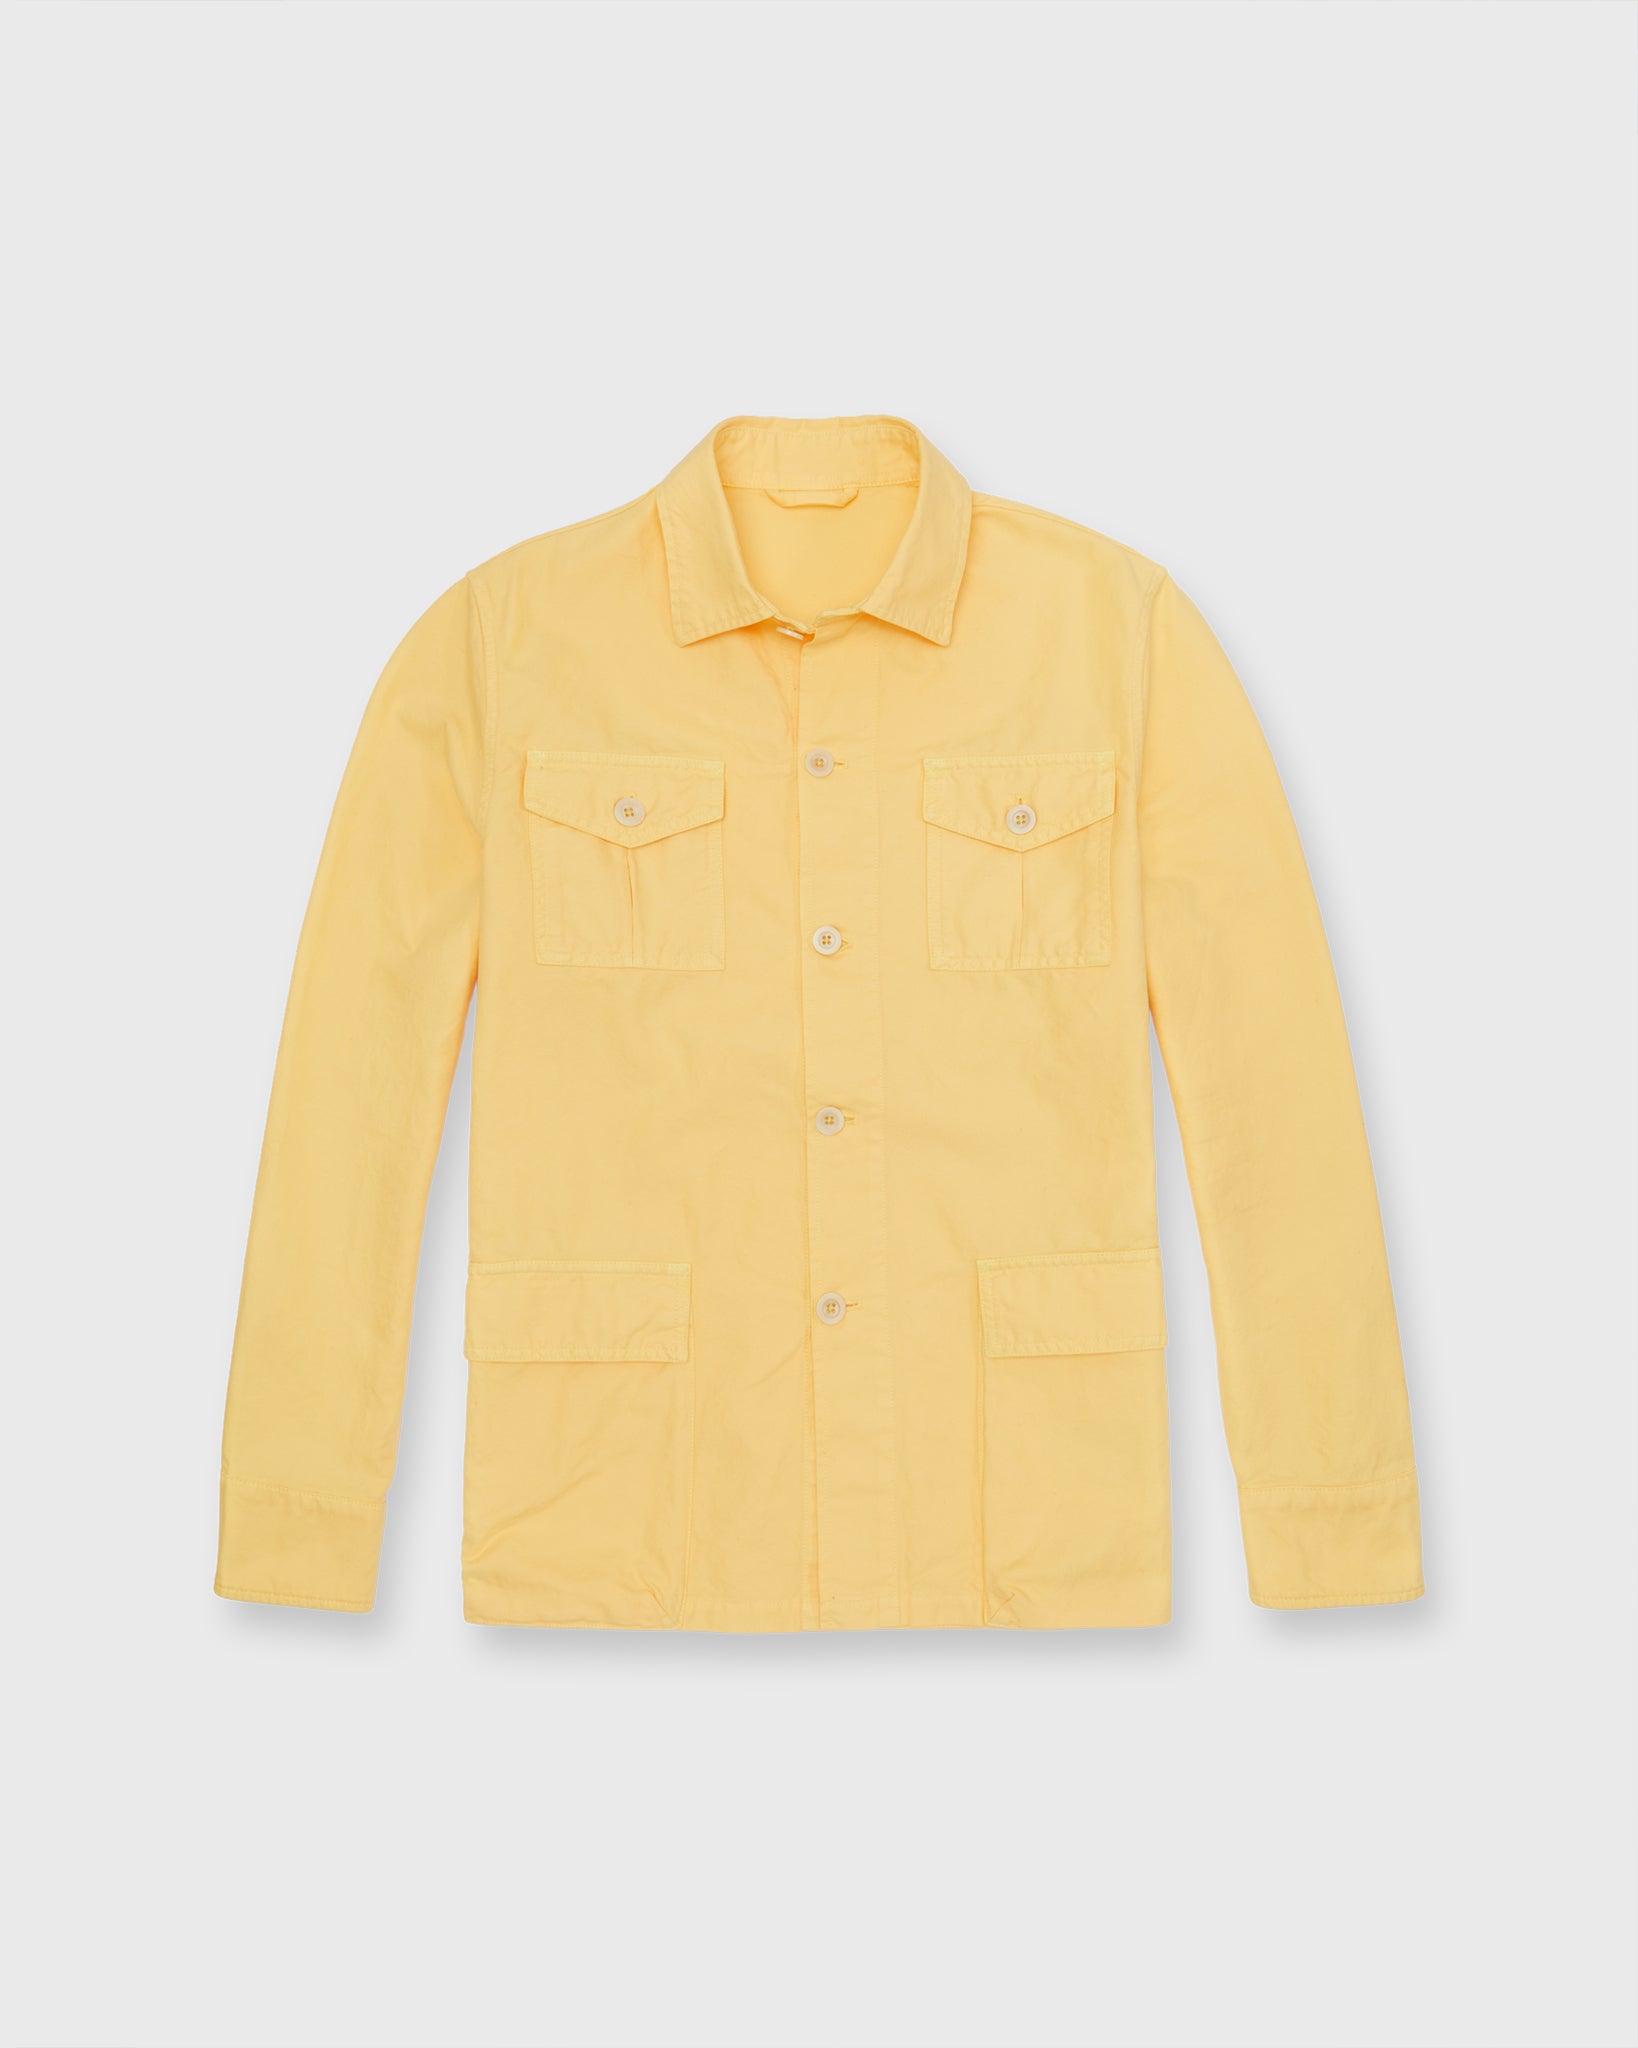 Military Jacket in Yellow Lightweight Canvas